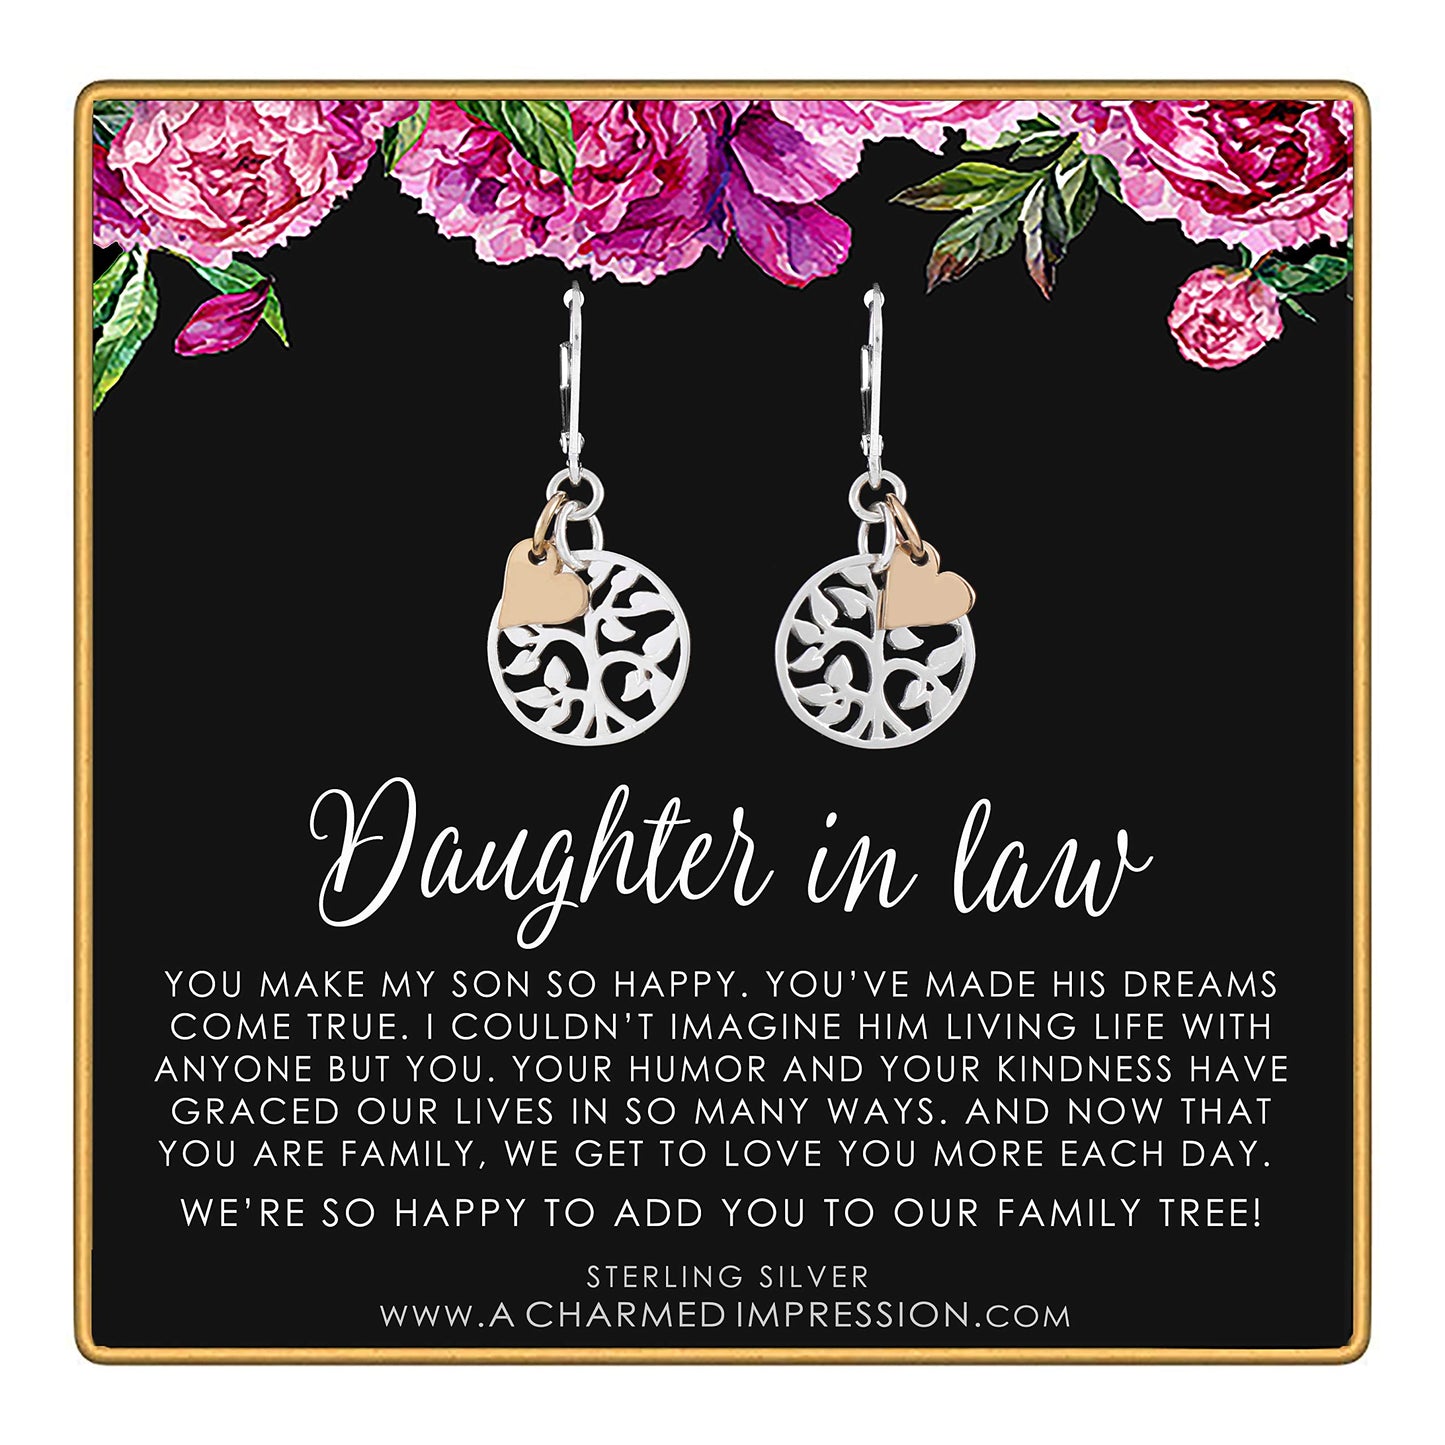 Daughter in Law Gift • Welcome to Our Family Tree • Sterling Silver Leverback Earrings • Gifts for Stepdaughter or Future New Daughter In Law • Silver Tree Gold Heart Charm • Jewelry for Women